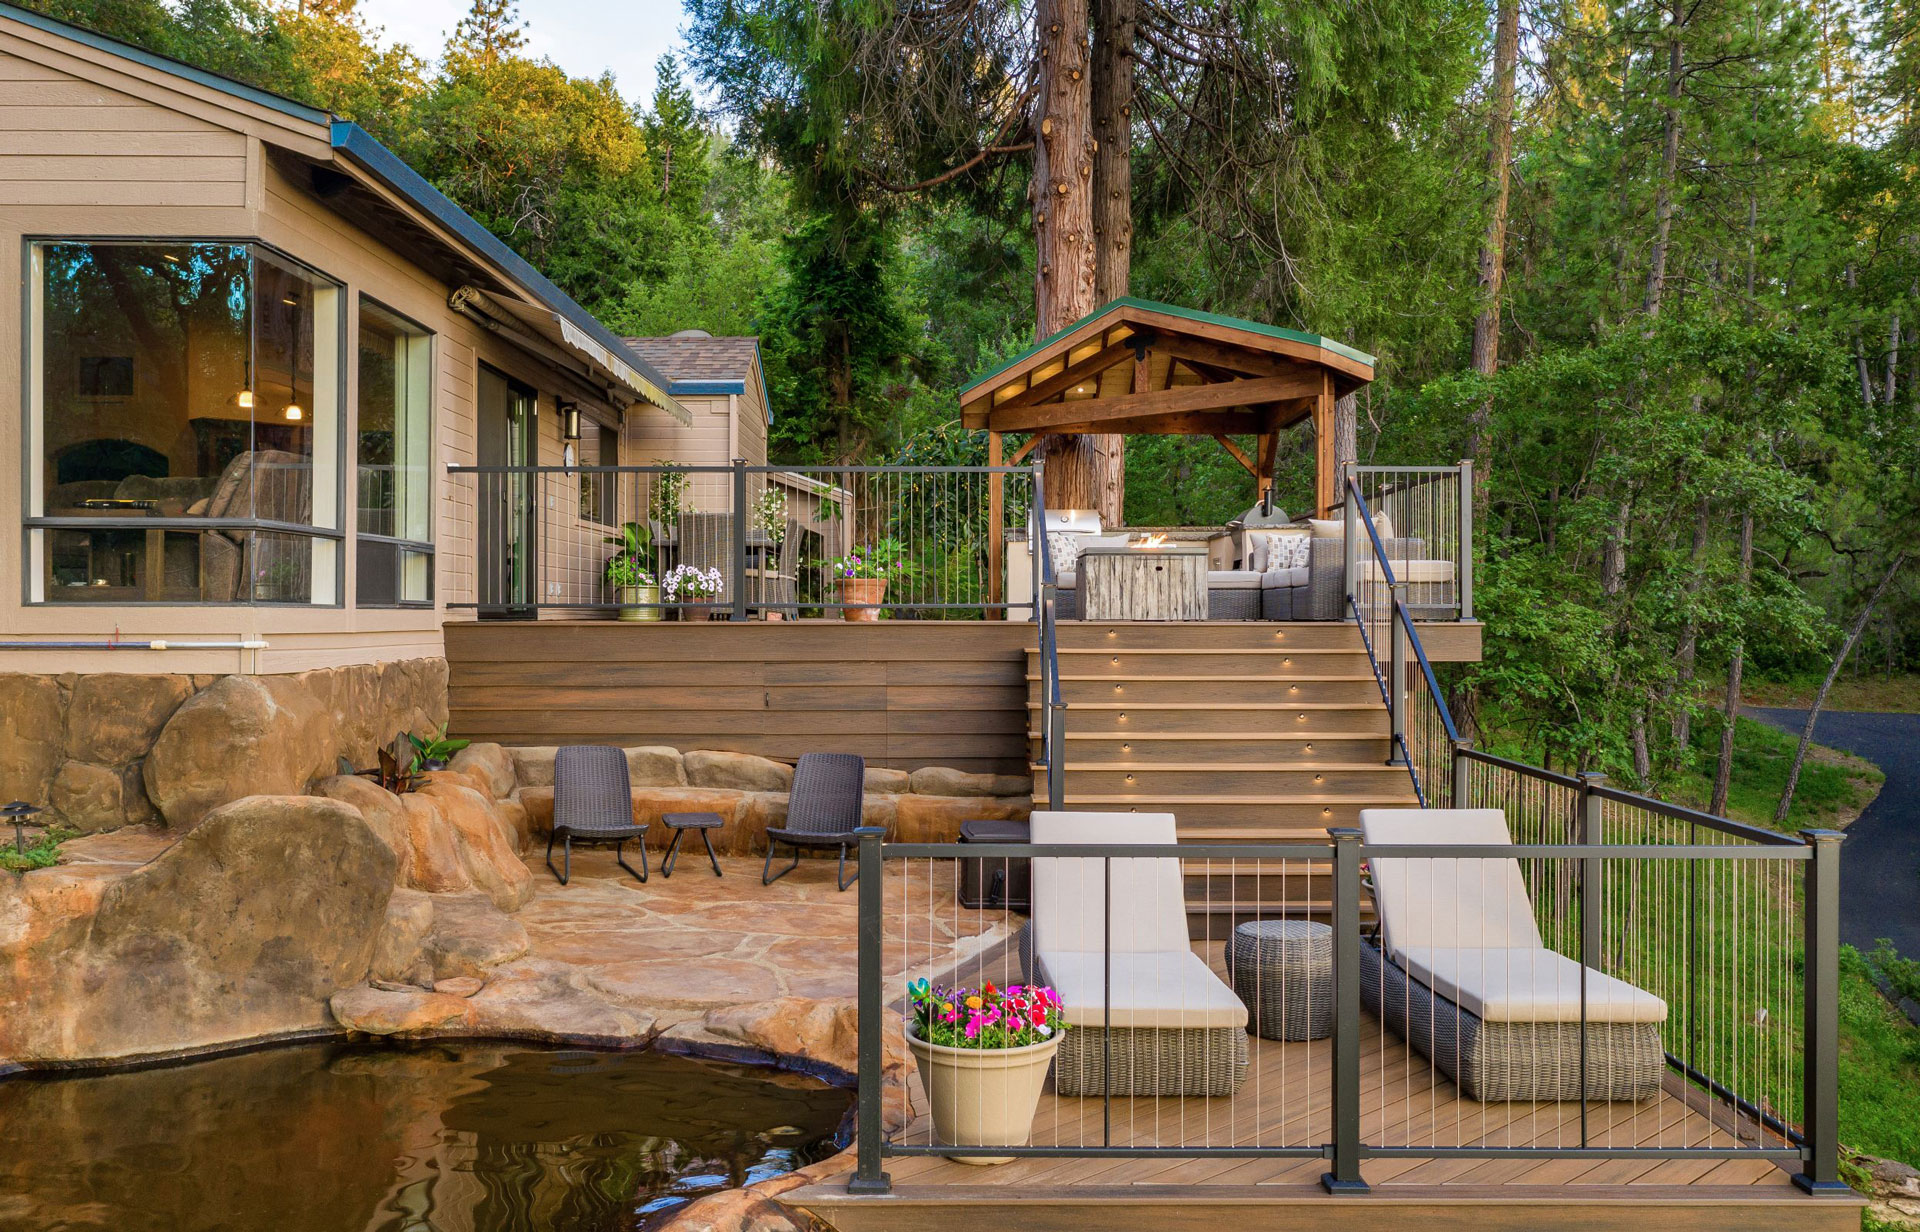 Cable railing enclosing  a multi-level deck with patio furniture and a rock swimming pool.